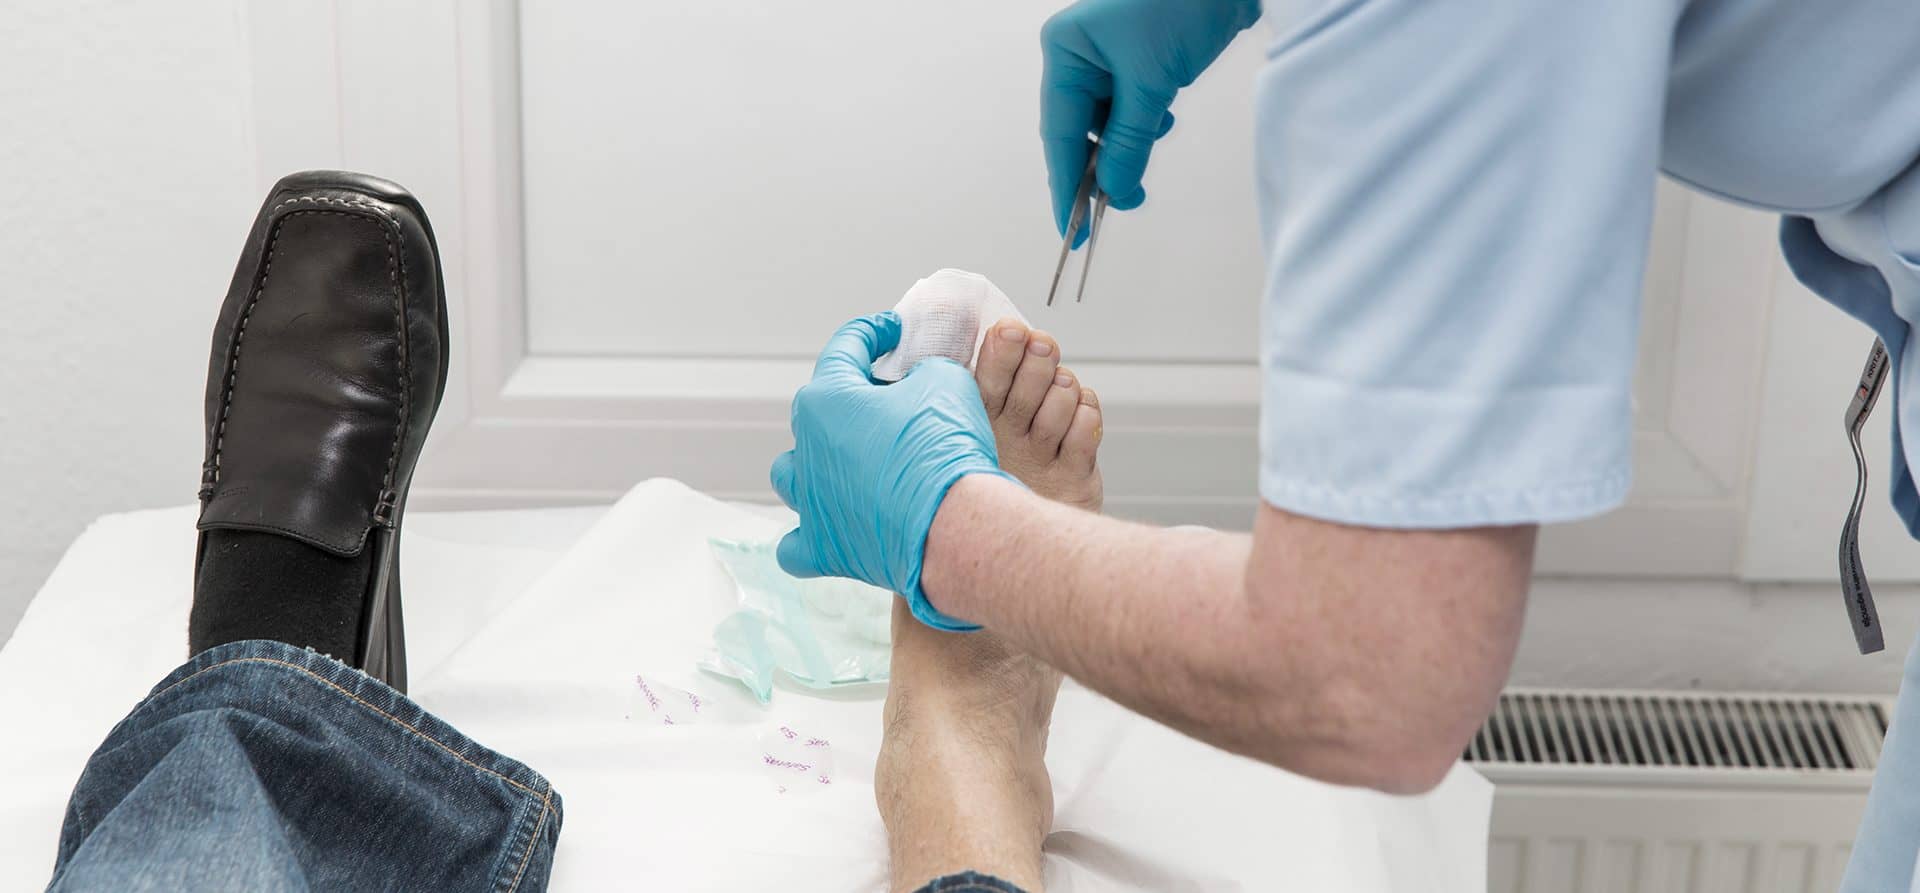 RACGP - Ingrown toenails: the role of the GP